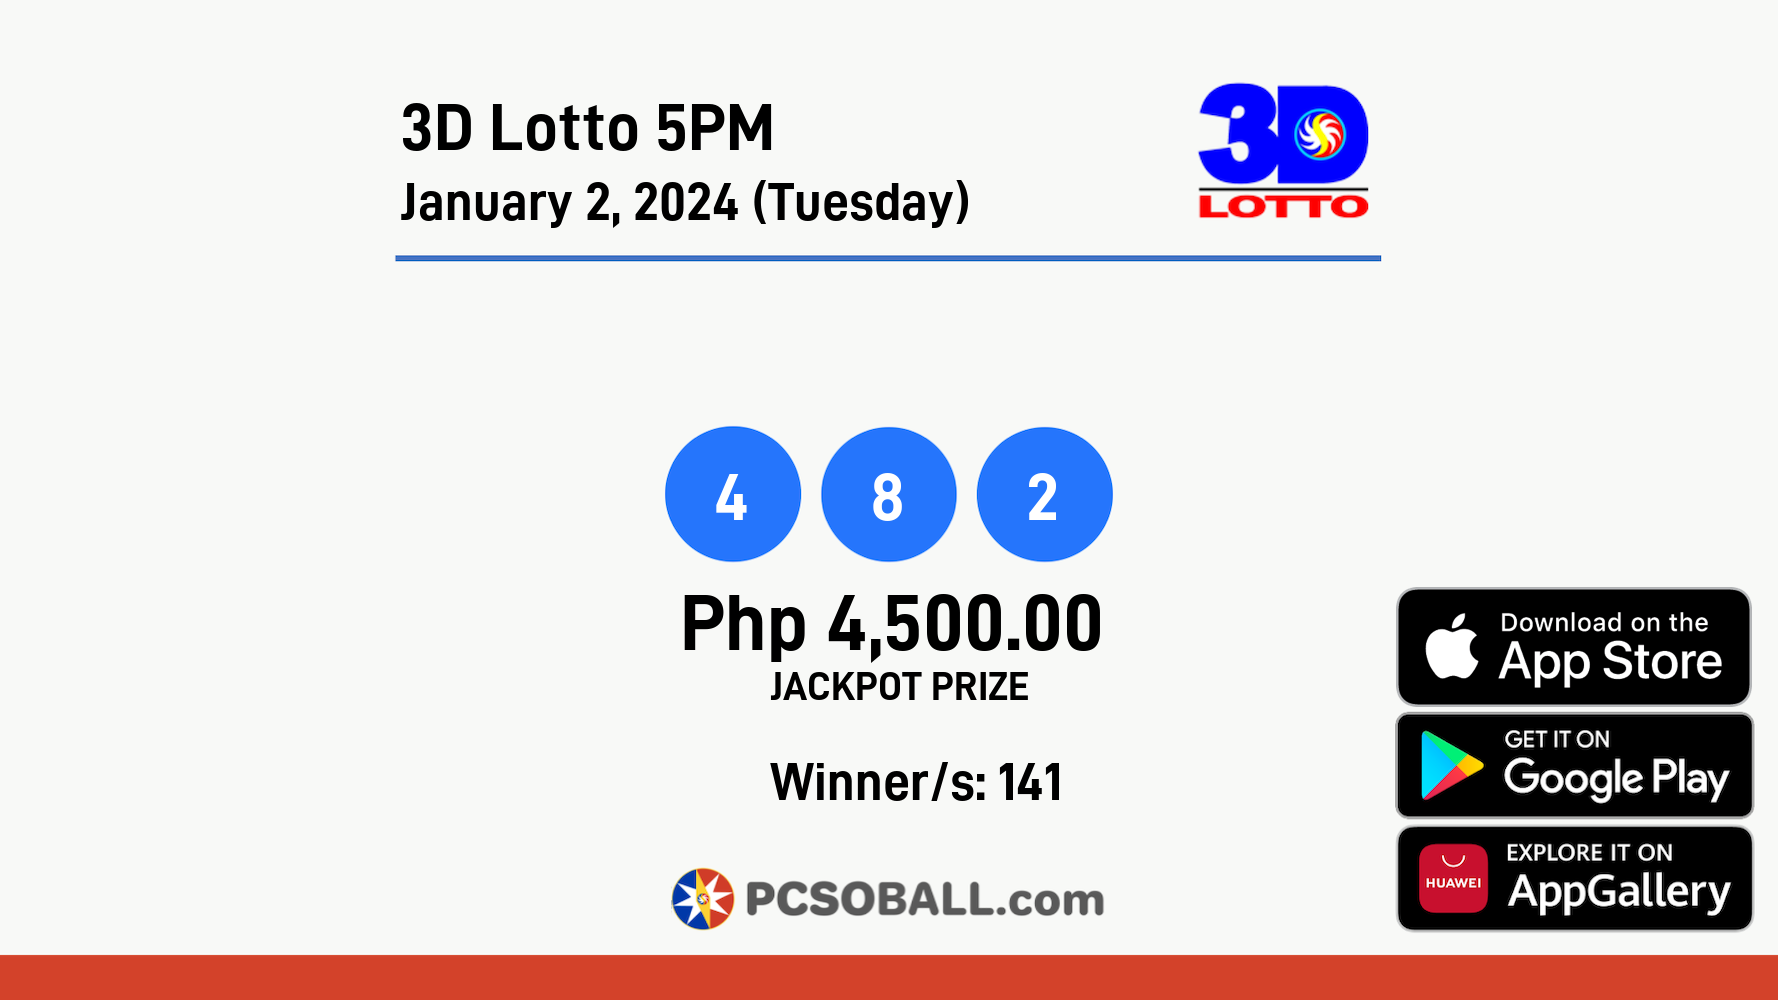 3D Lotto 5PM January 2, 2024 (Tuesday) Result